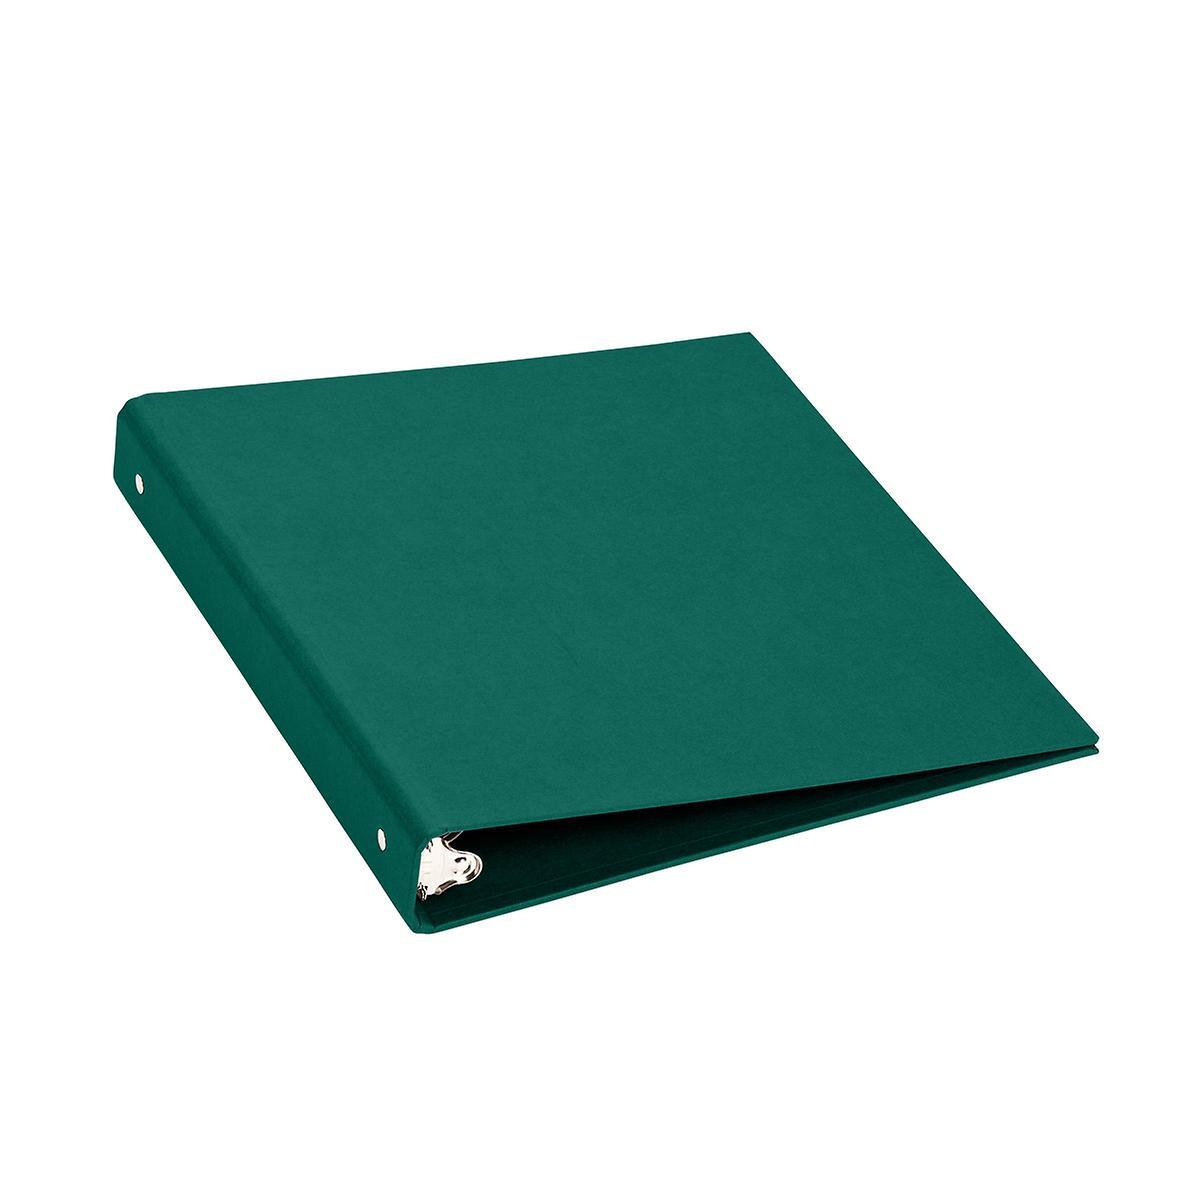 Ring Binder | Simple | Nice Quality | Low Price | 3 Ring Binder | Many Colors | Personalization Available-Guest Book-Sterling-and-Burke